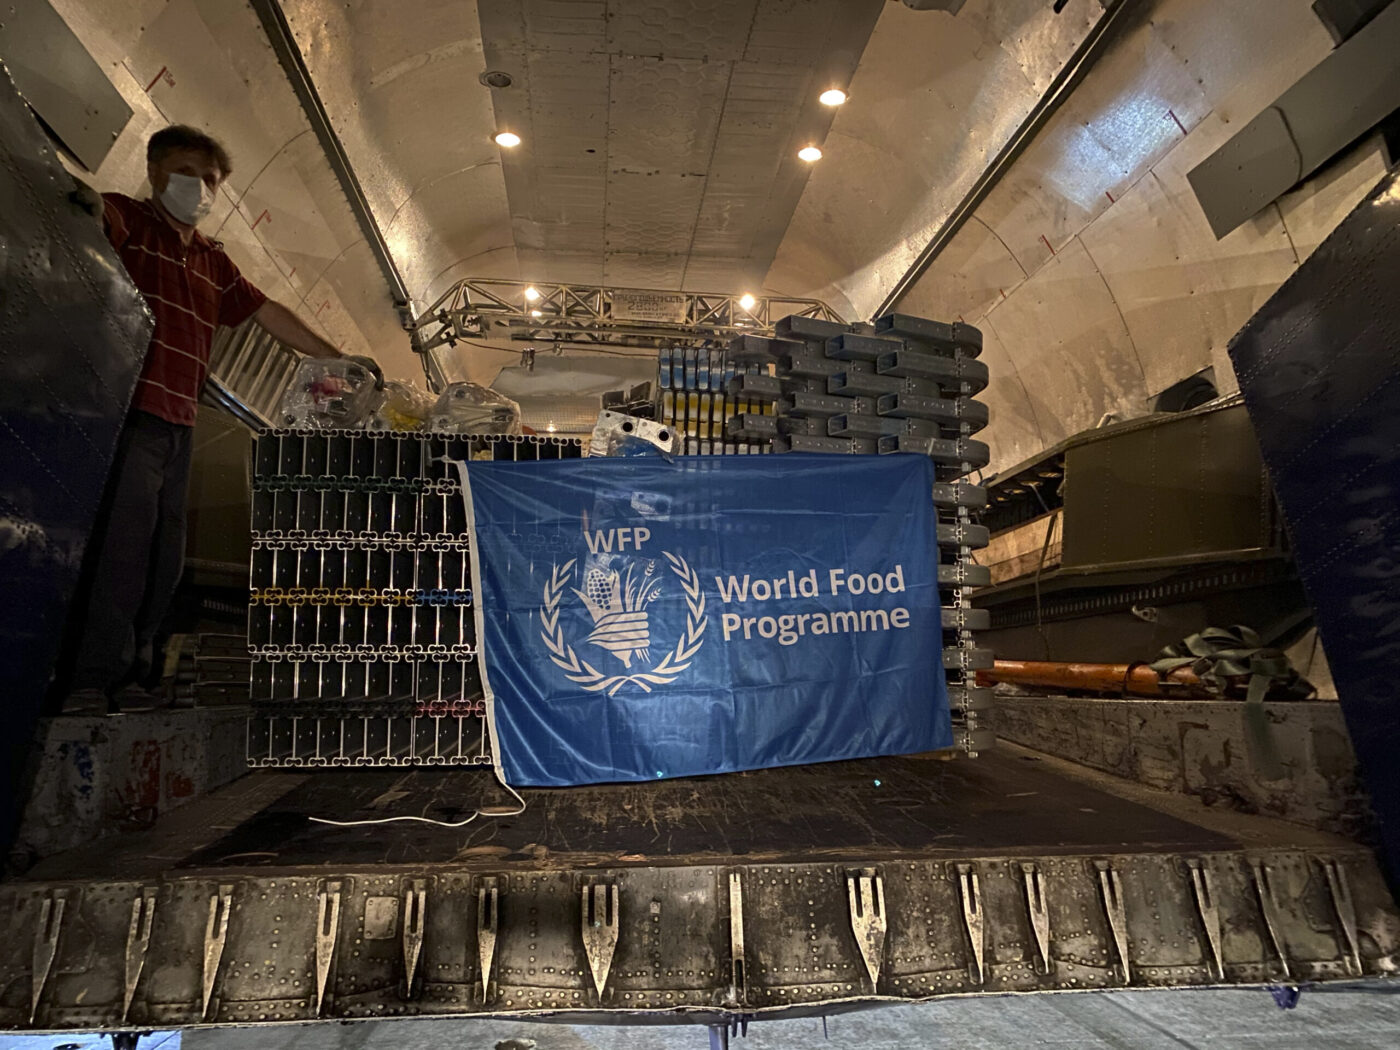 crates on aircraft with WFP flag